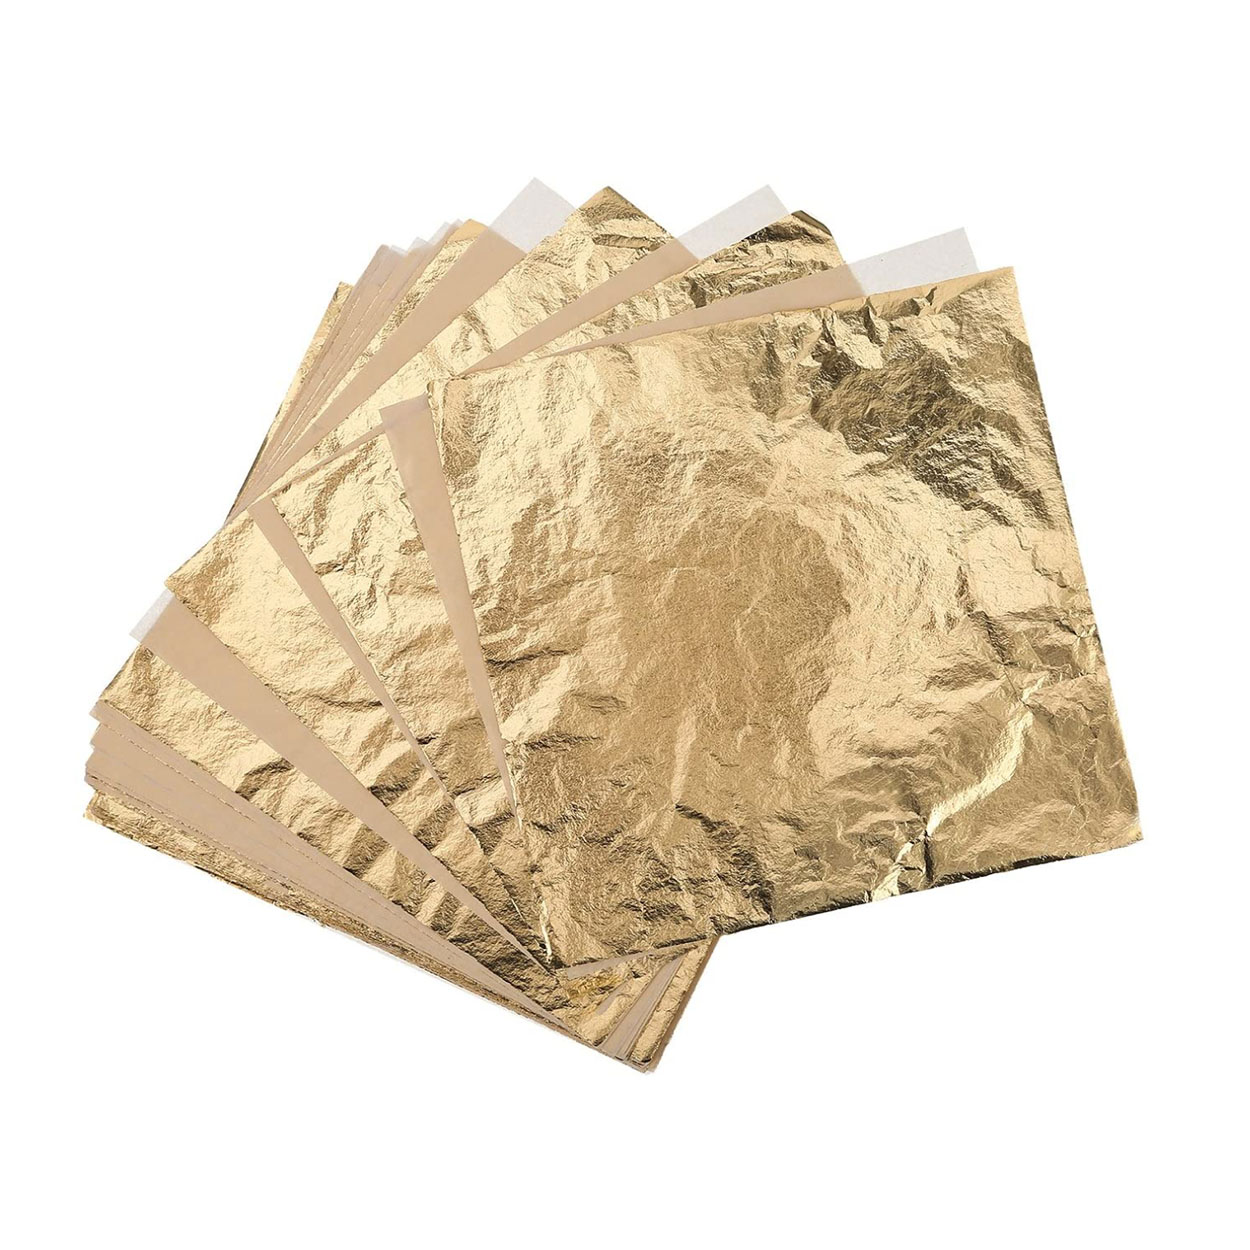 100 Sheets Imitation Gold Leaf for Art, Crafts Decoration, Gilding  Crafting, Frames, 5.5 by 5.5 Inches